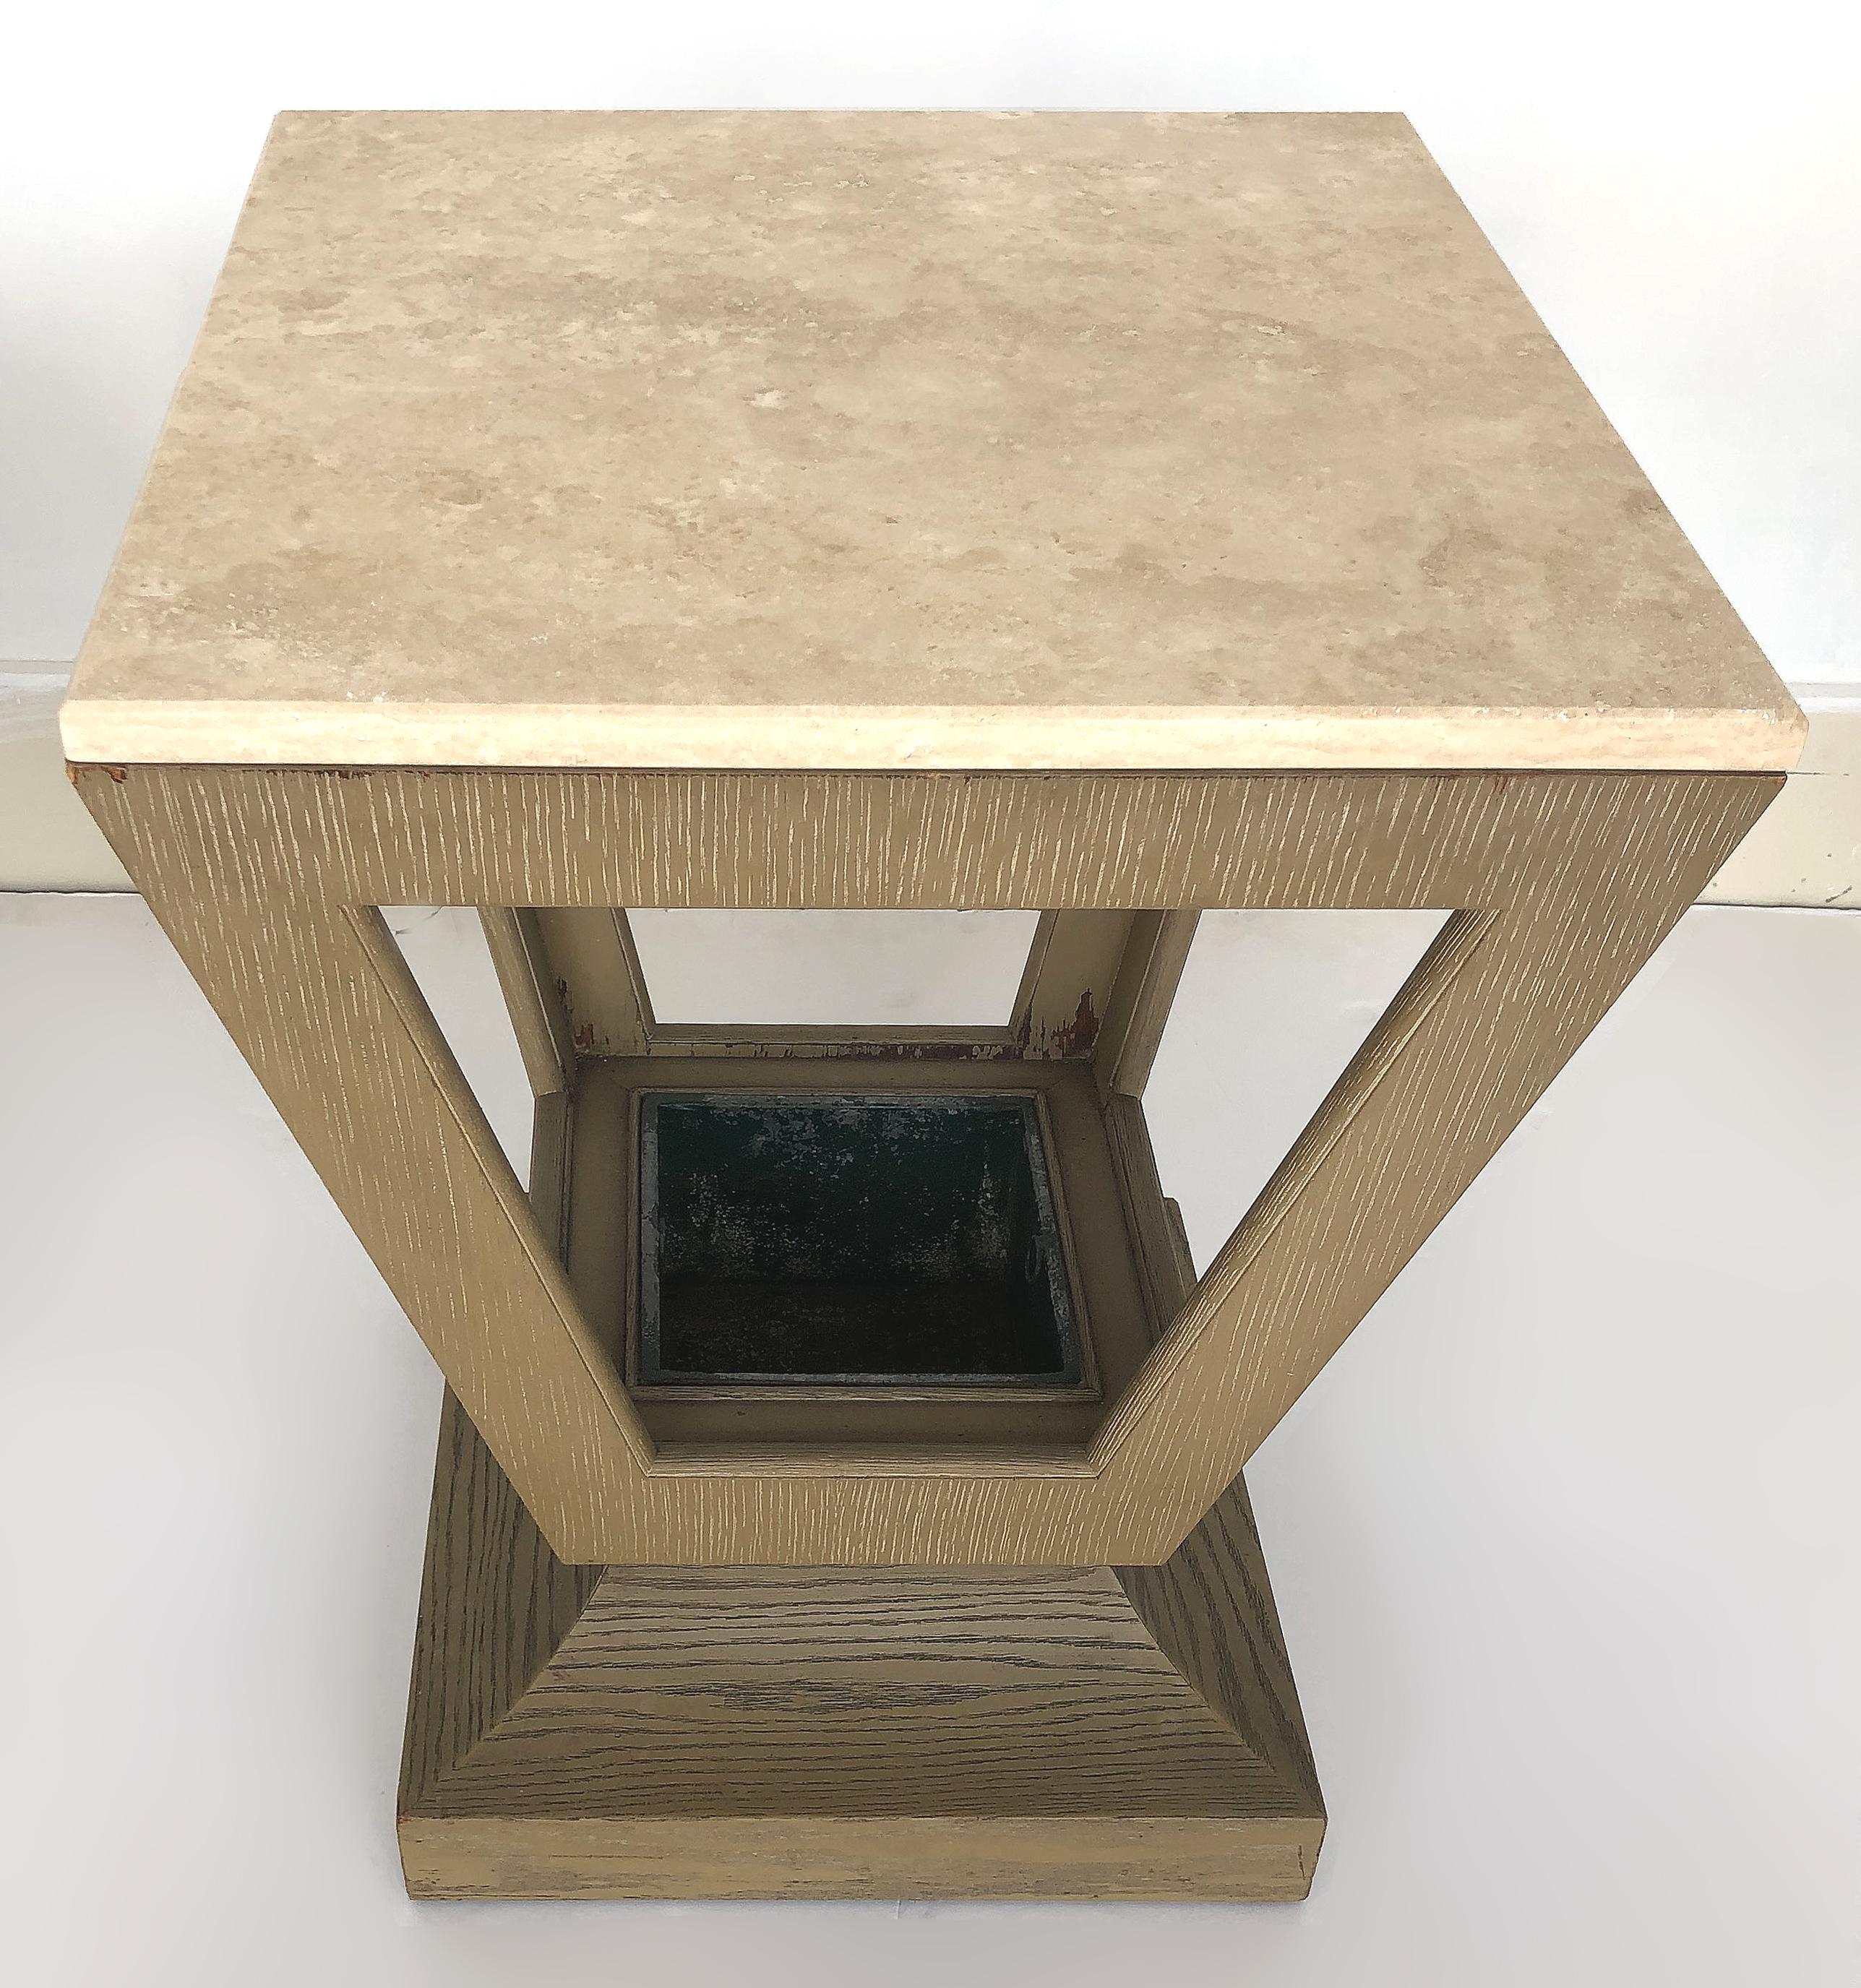 20th Century Art Deco Cerused Wood/Travertine End/Side Tables with Planters